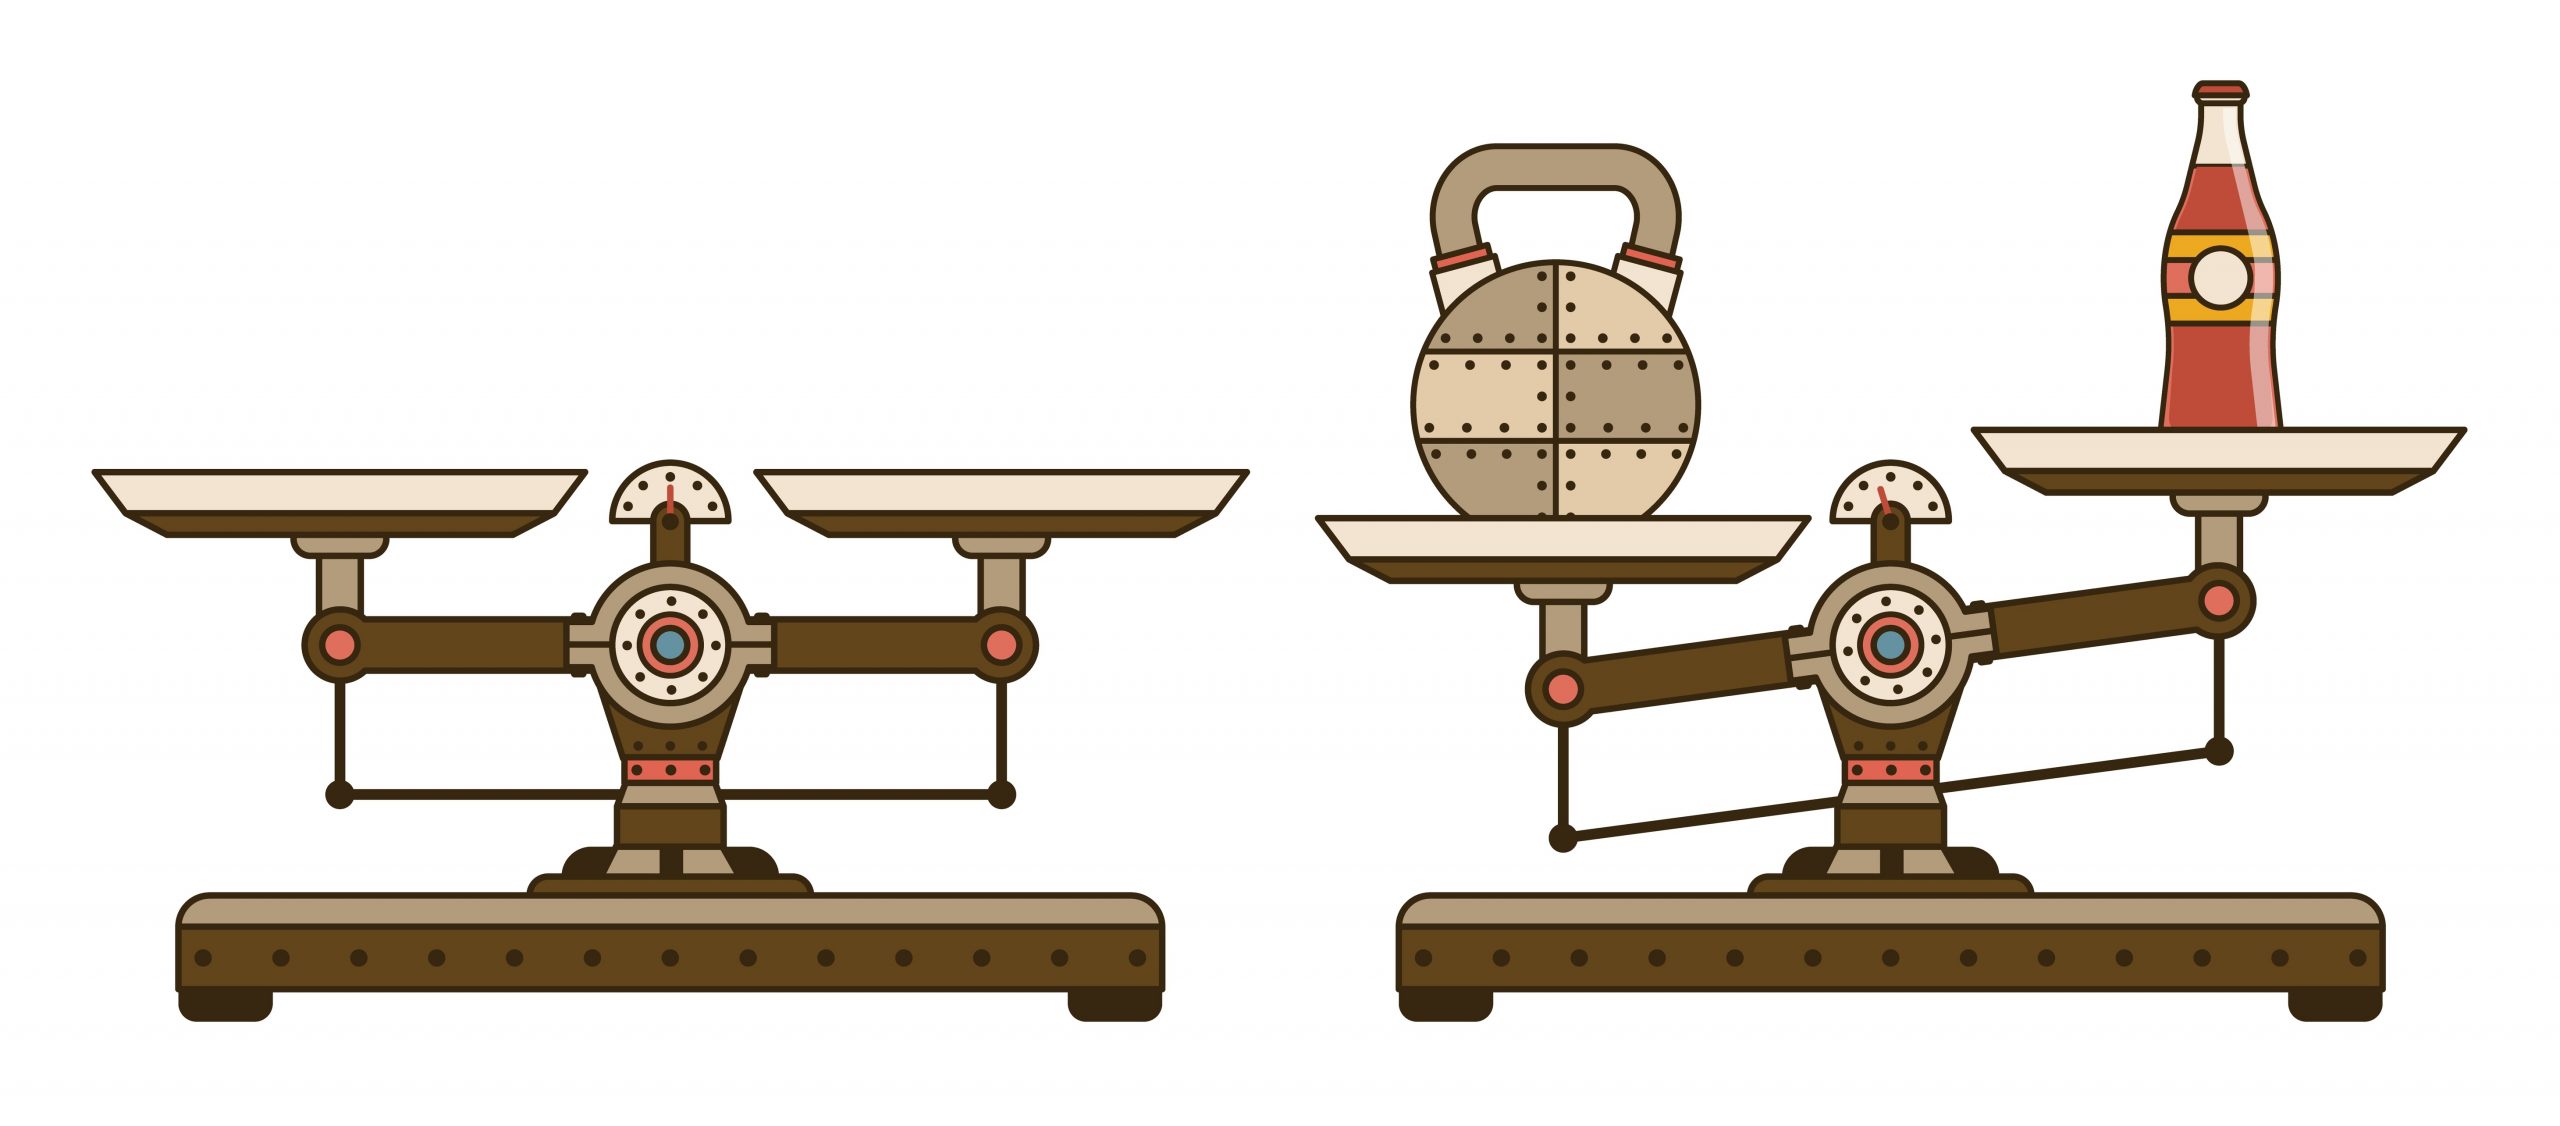 Industrial scales with weights - steampunk cartoon style